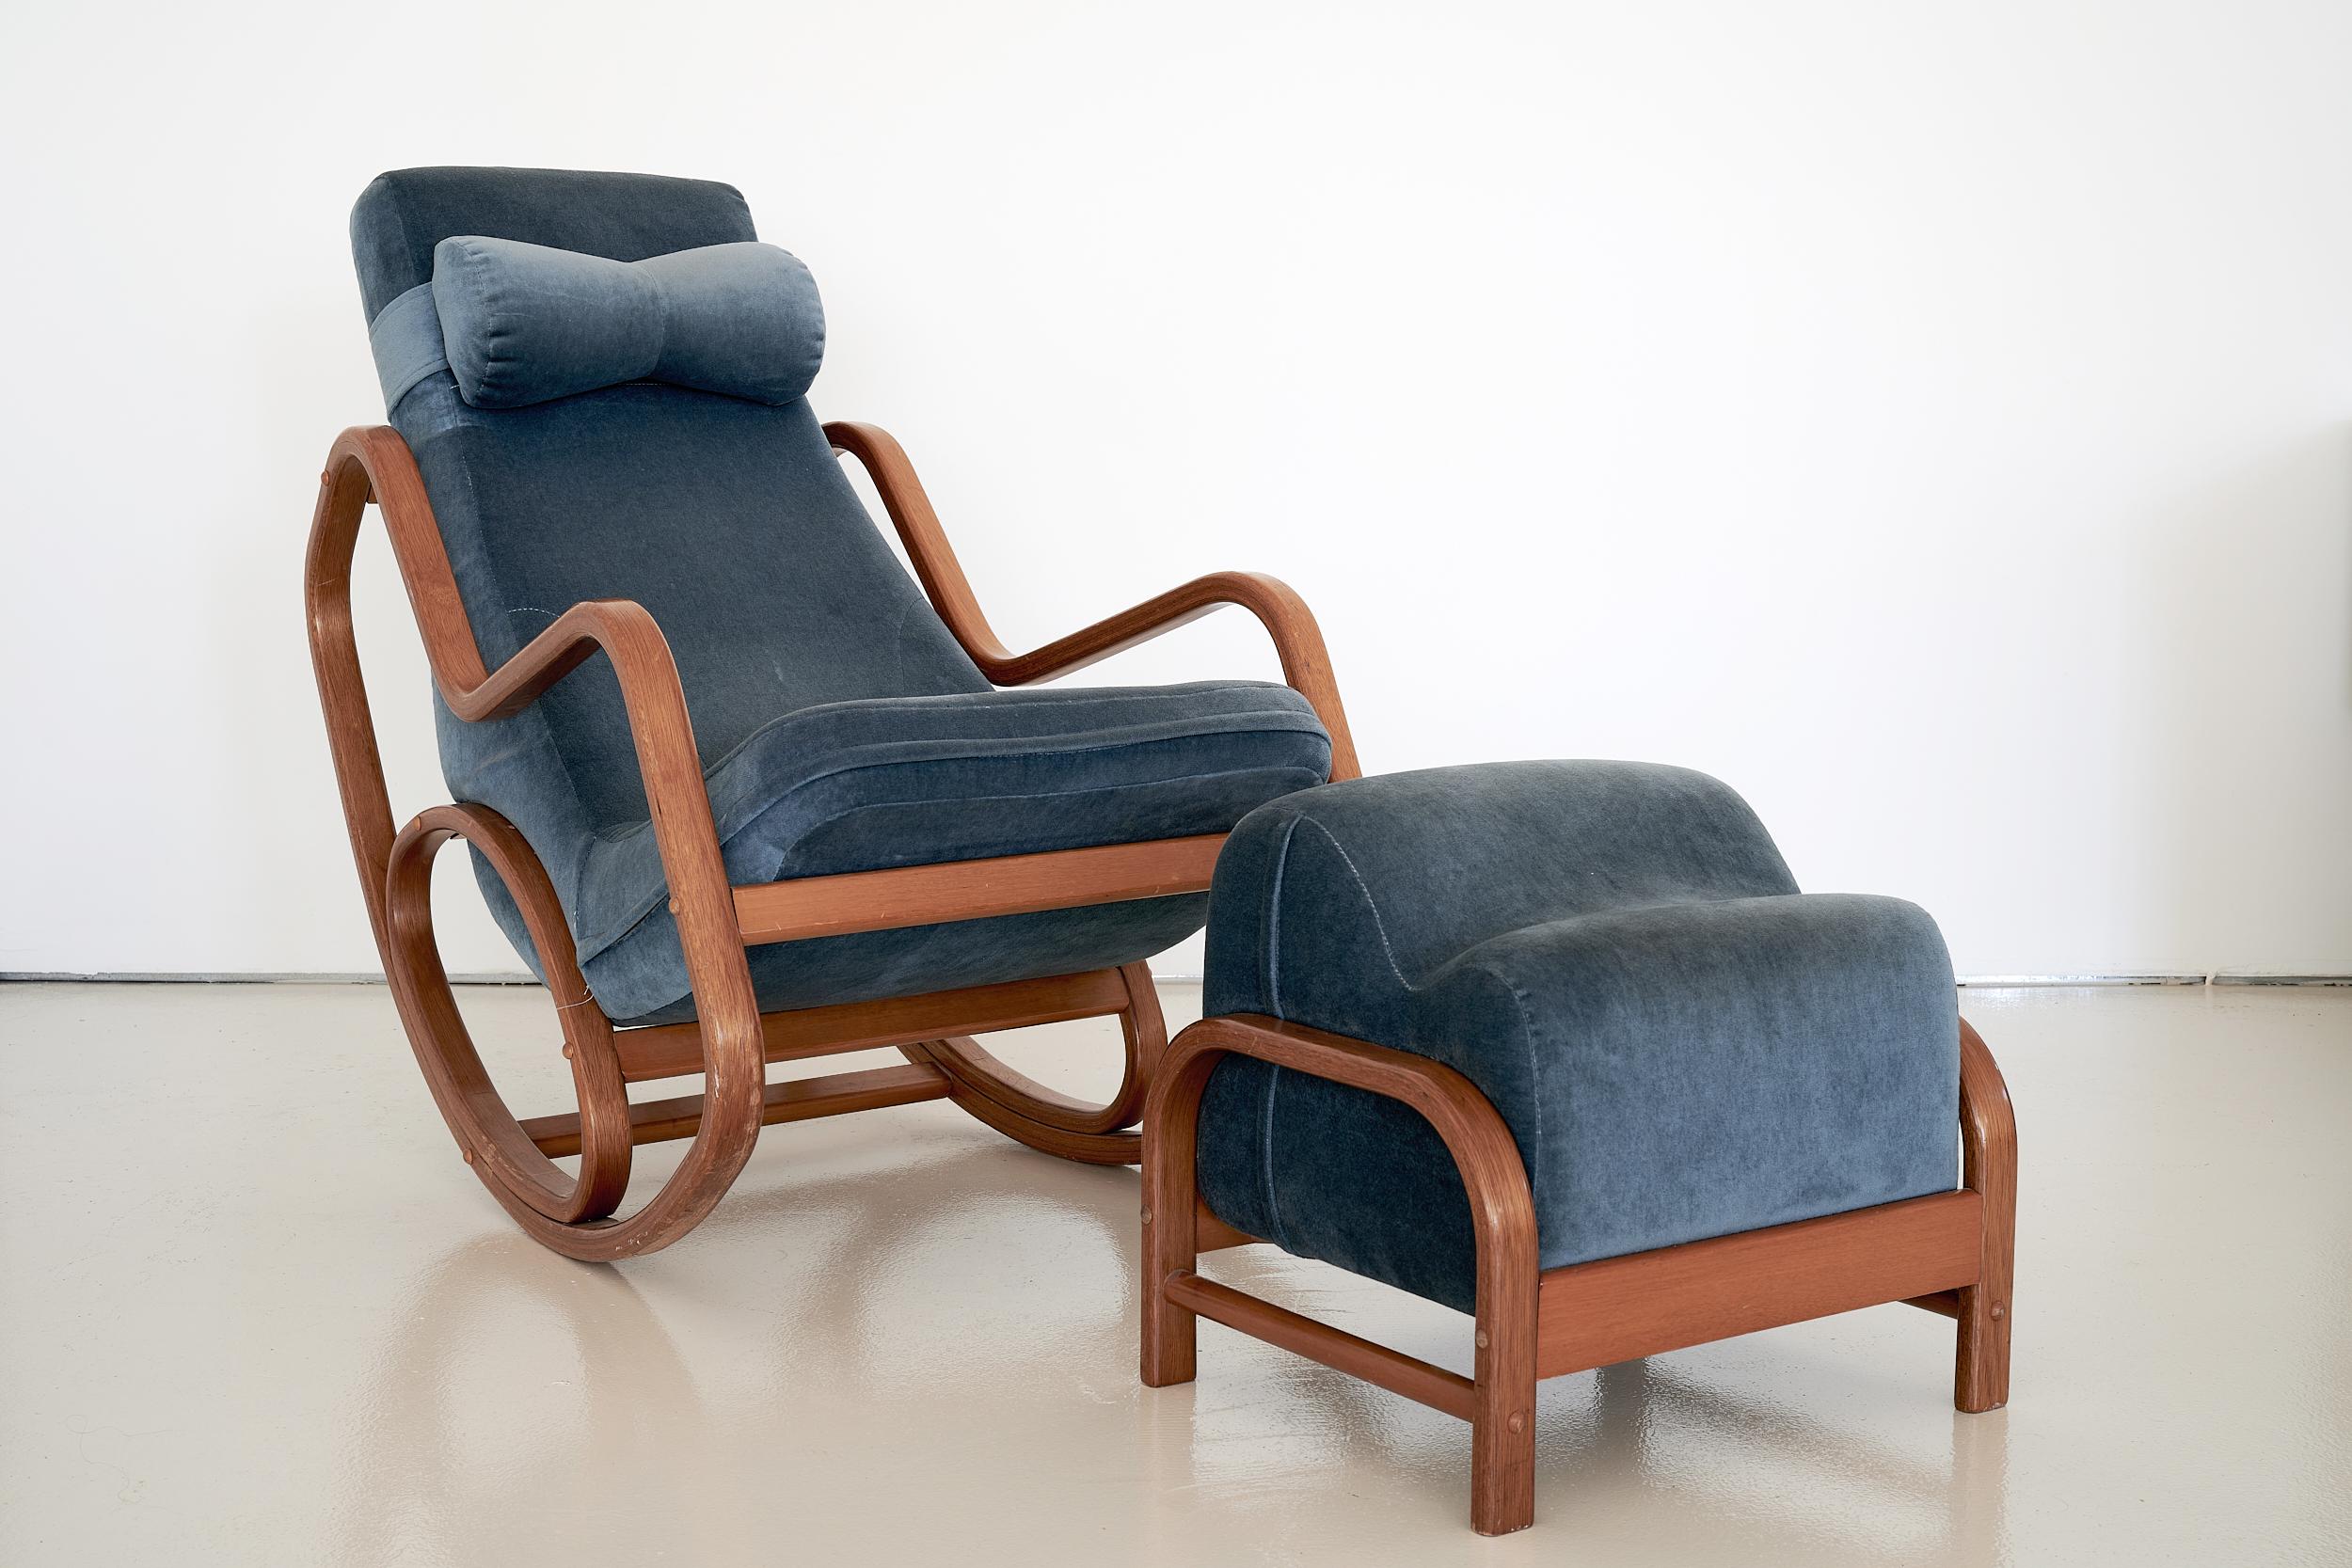 Post 1950s, believed to be 1970s

Manufactured by BioForm Seating Systems

Solid bentwood frame. Two area of small wear and a few very light scratches consistent with age. (see photos)

Head rest pillow is adjustable and can be easily slid up